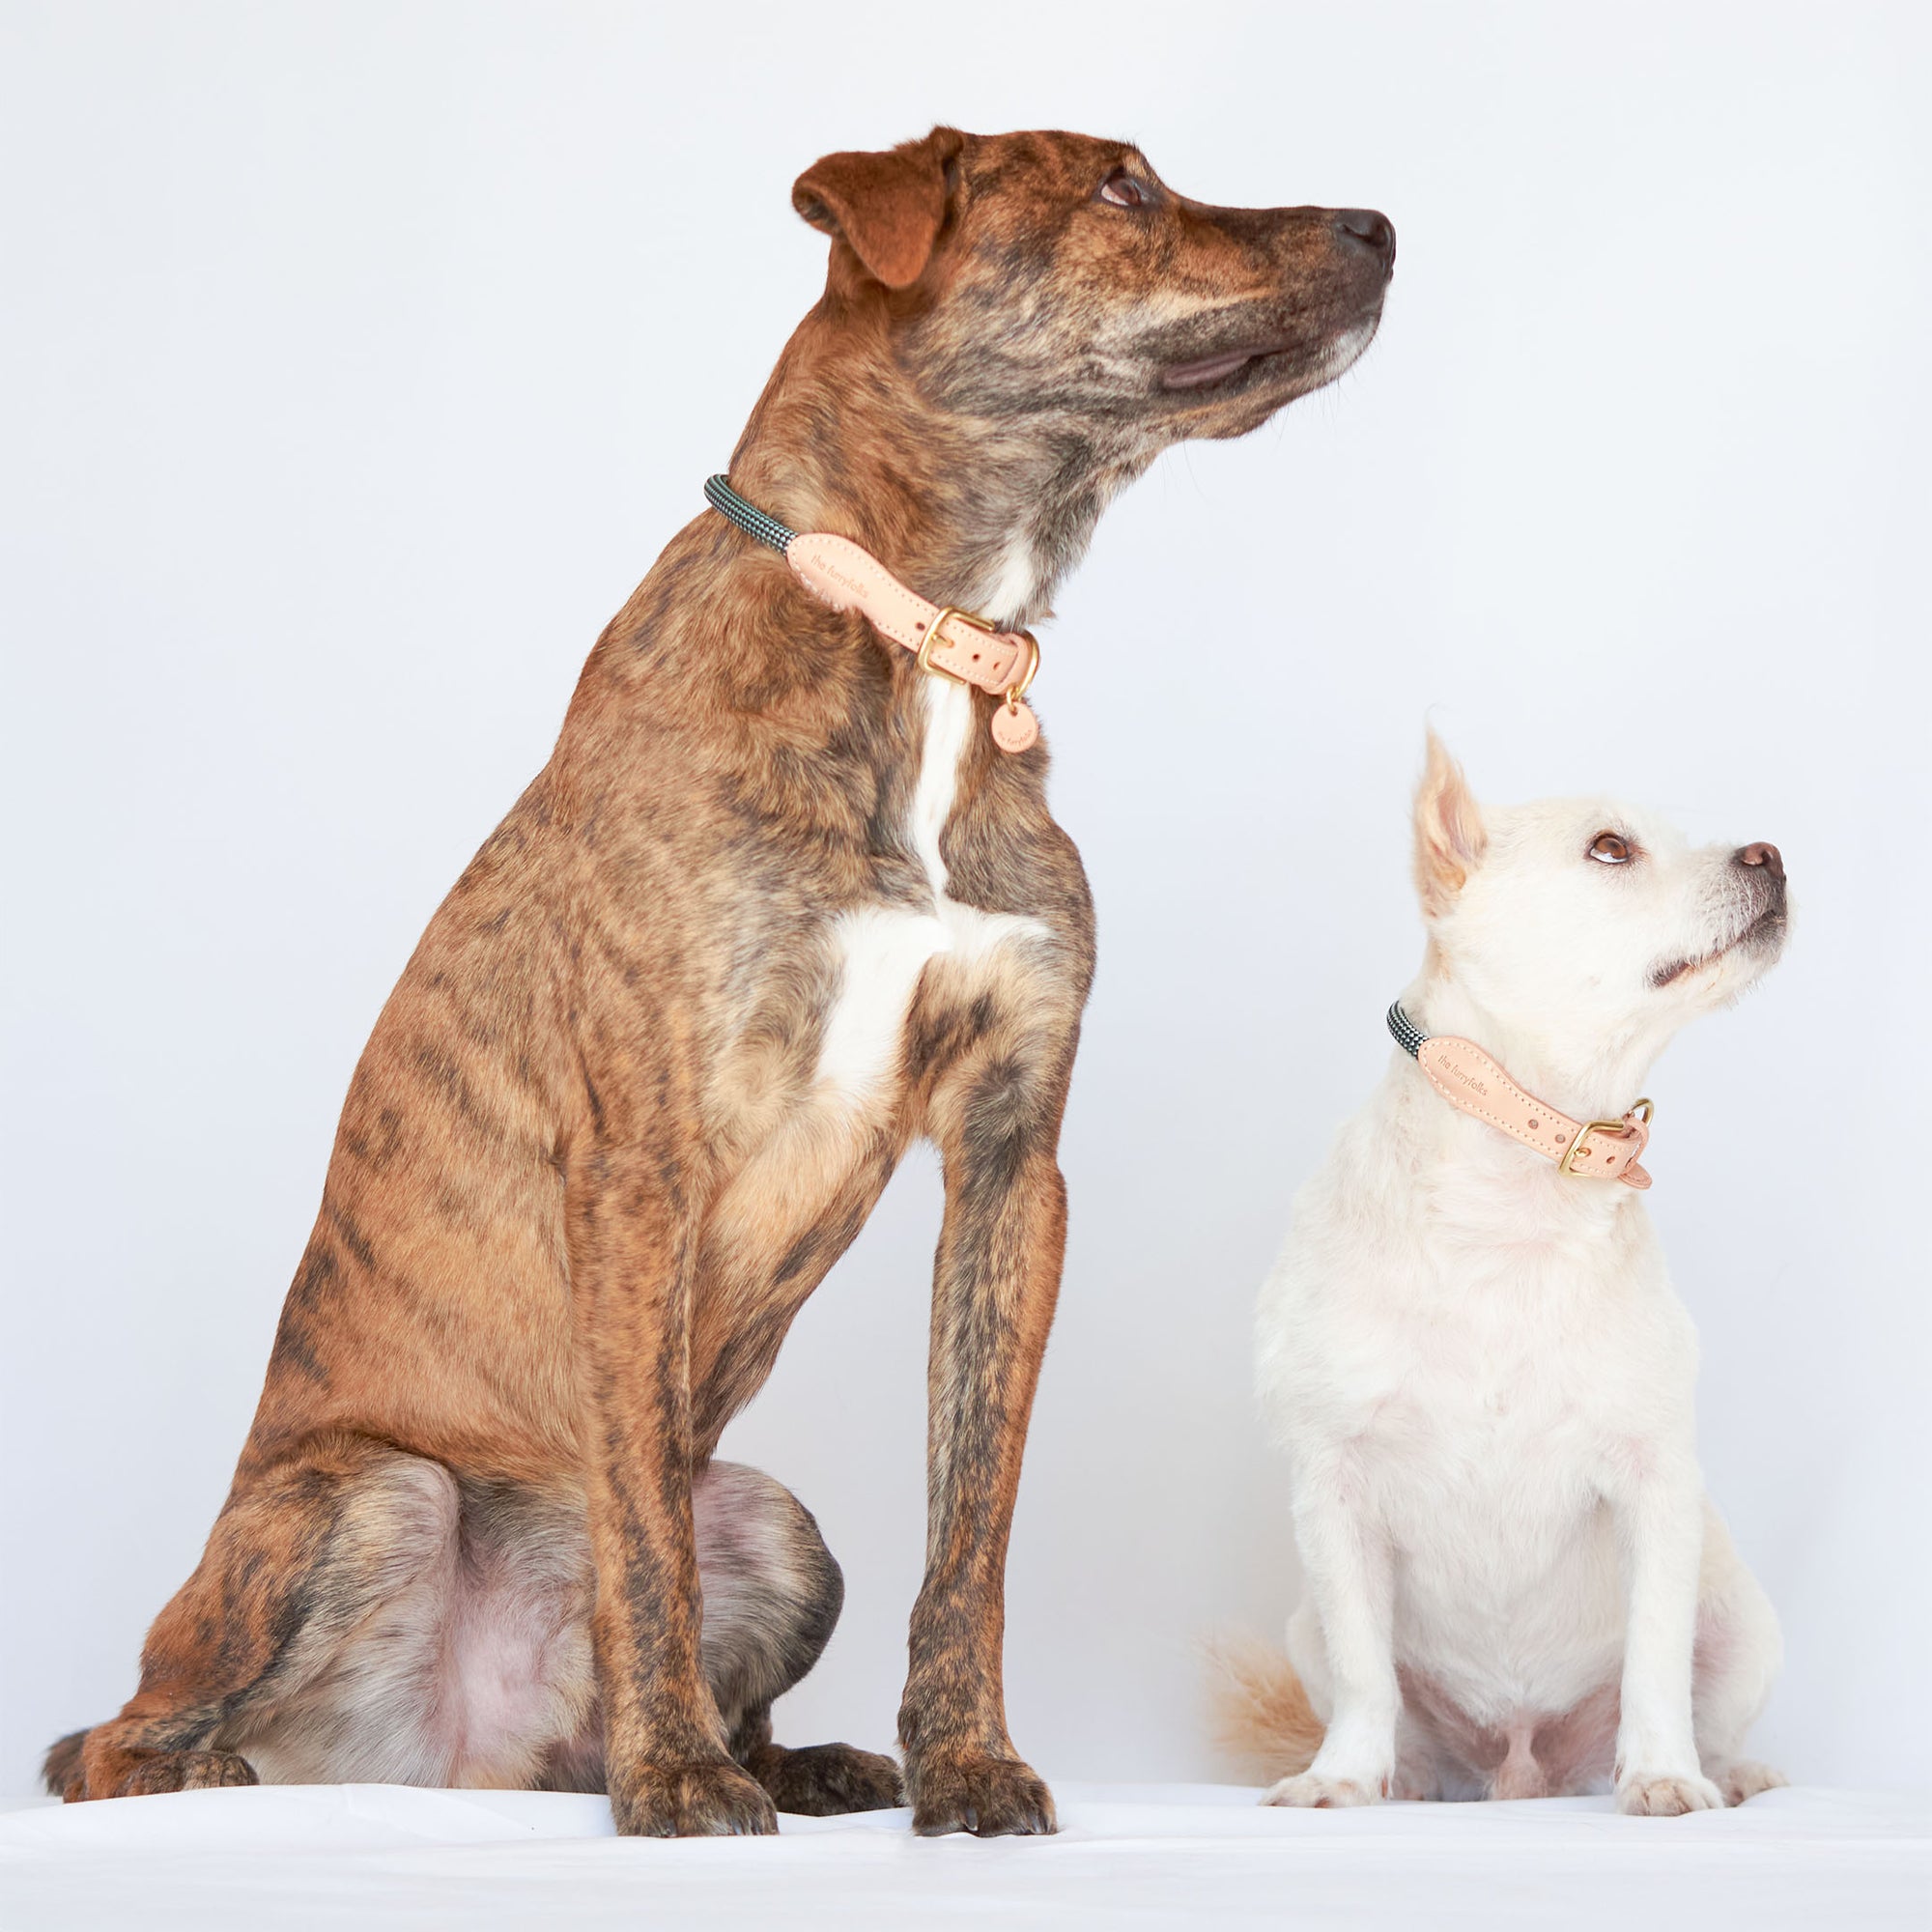 The image depicts two dogs sitting side by side against a white backdrop. The dog on the left is brindle with a lean build and is wearing a collar with a teal and black woven pattern and tan leather accents, likely from the same set we've seen earlier by "The Furryfolks". The smaller, white dog on the right sports a similar style collar but with a different color scheme, suggesting the brand offers a variety of options. Both animals appear calm and attentive, posing for the photo with a dignified posture.